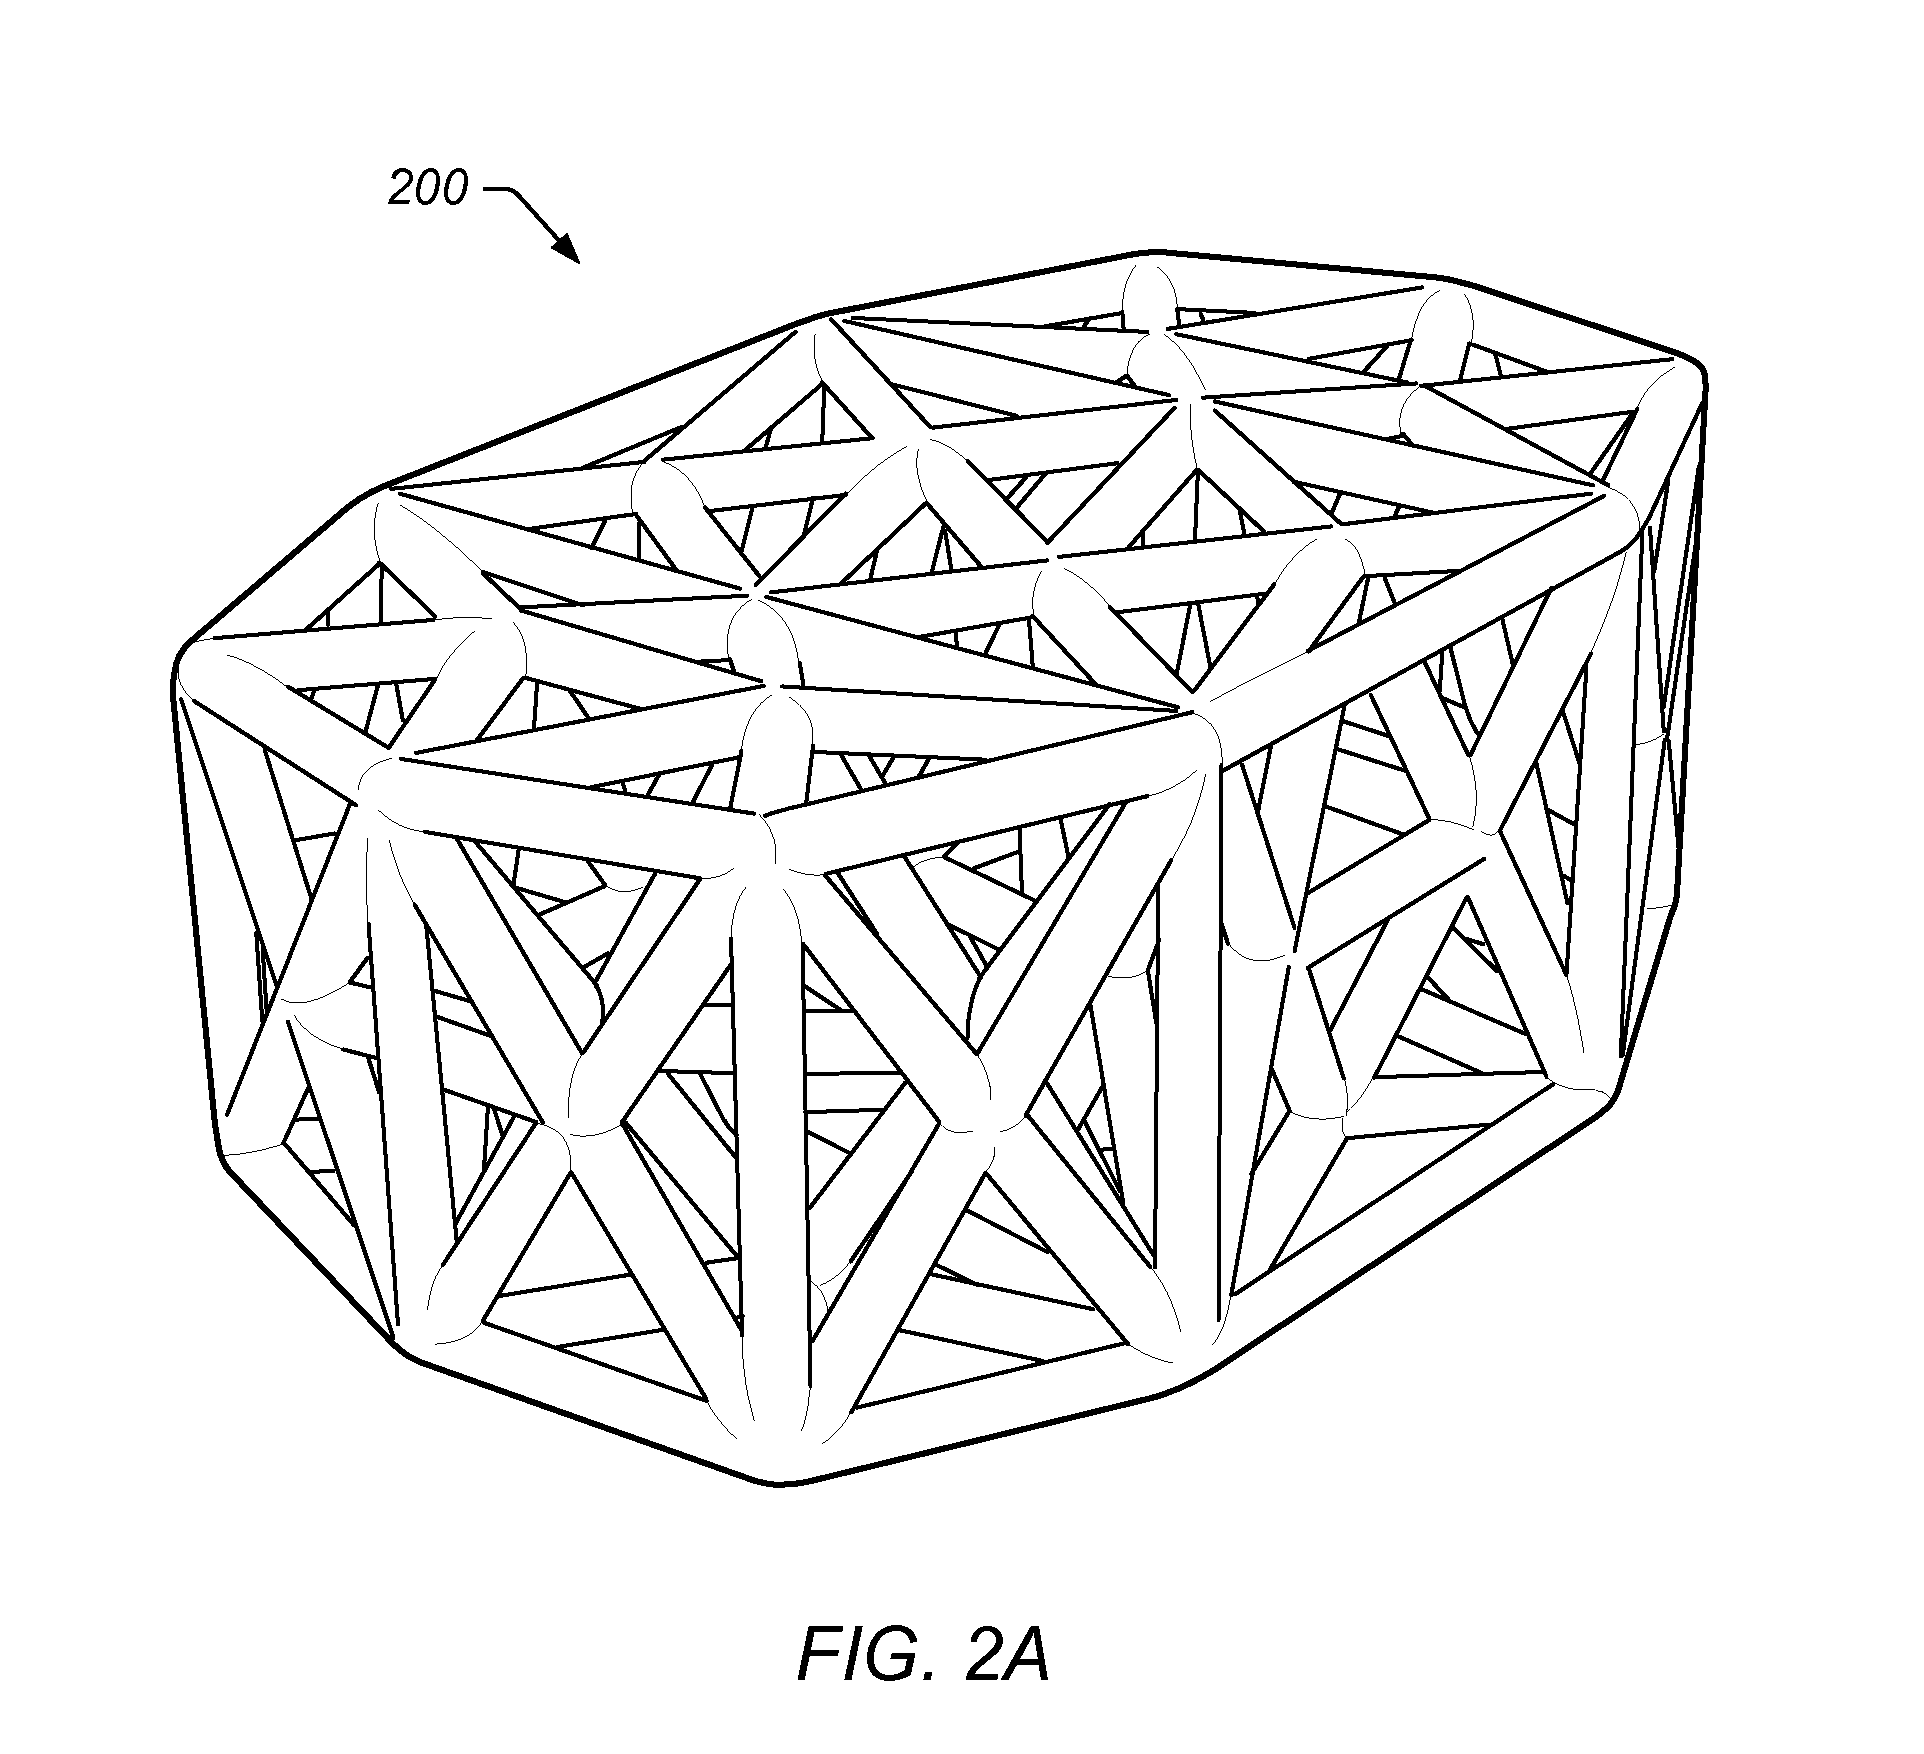 Implant system and method